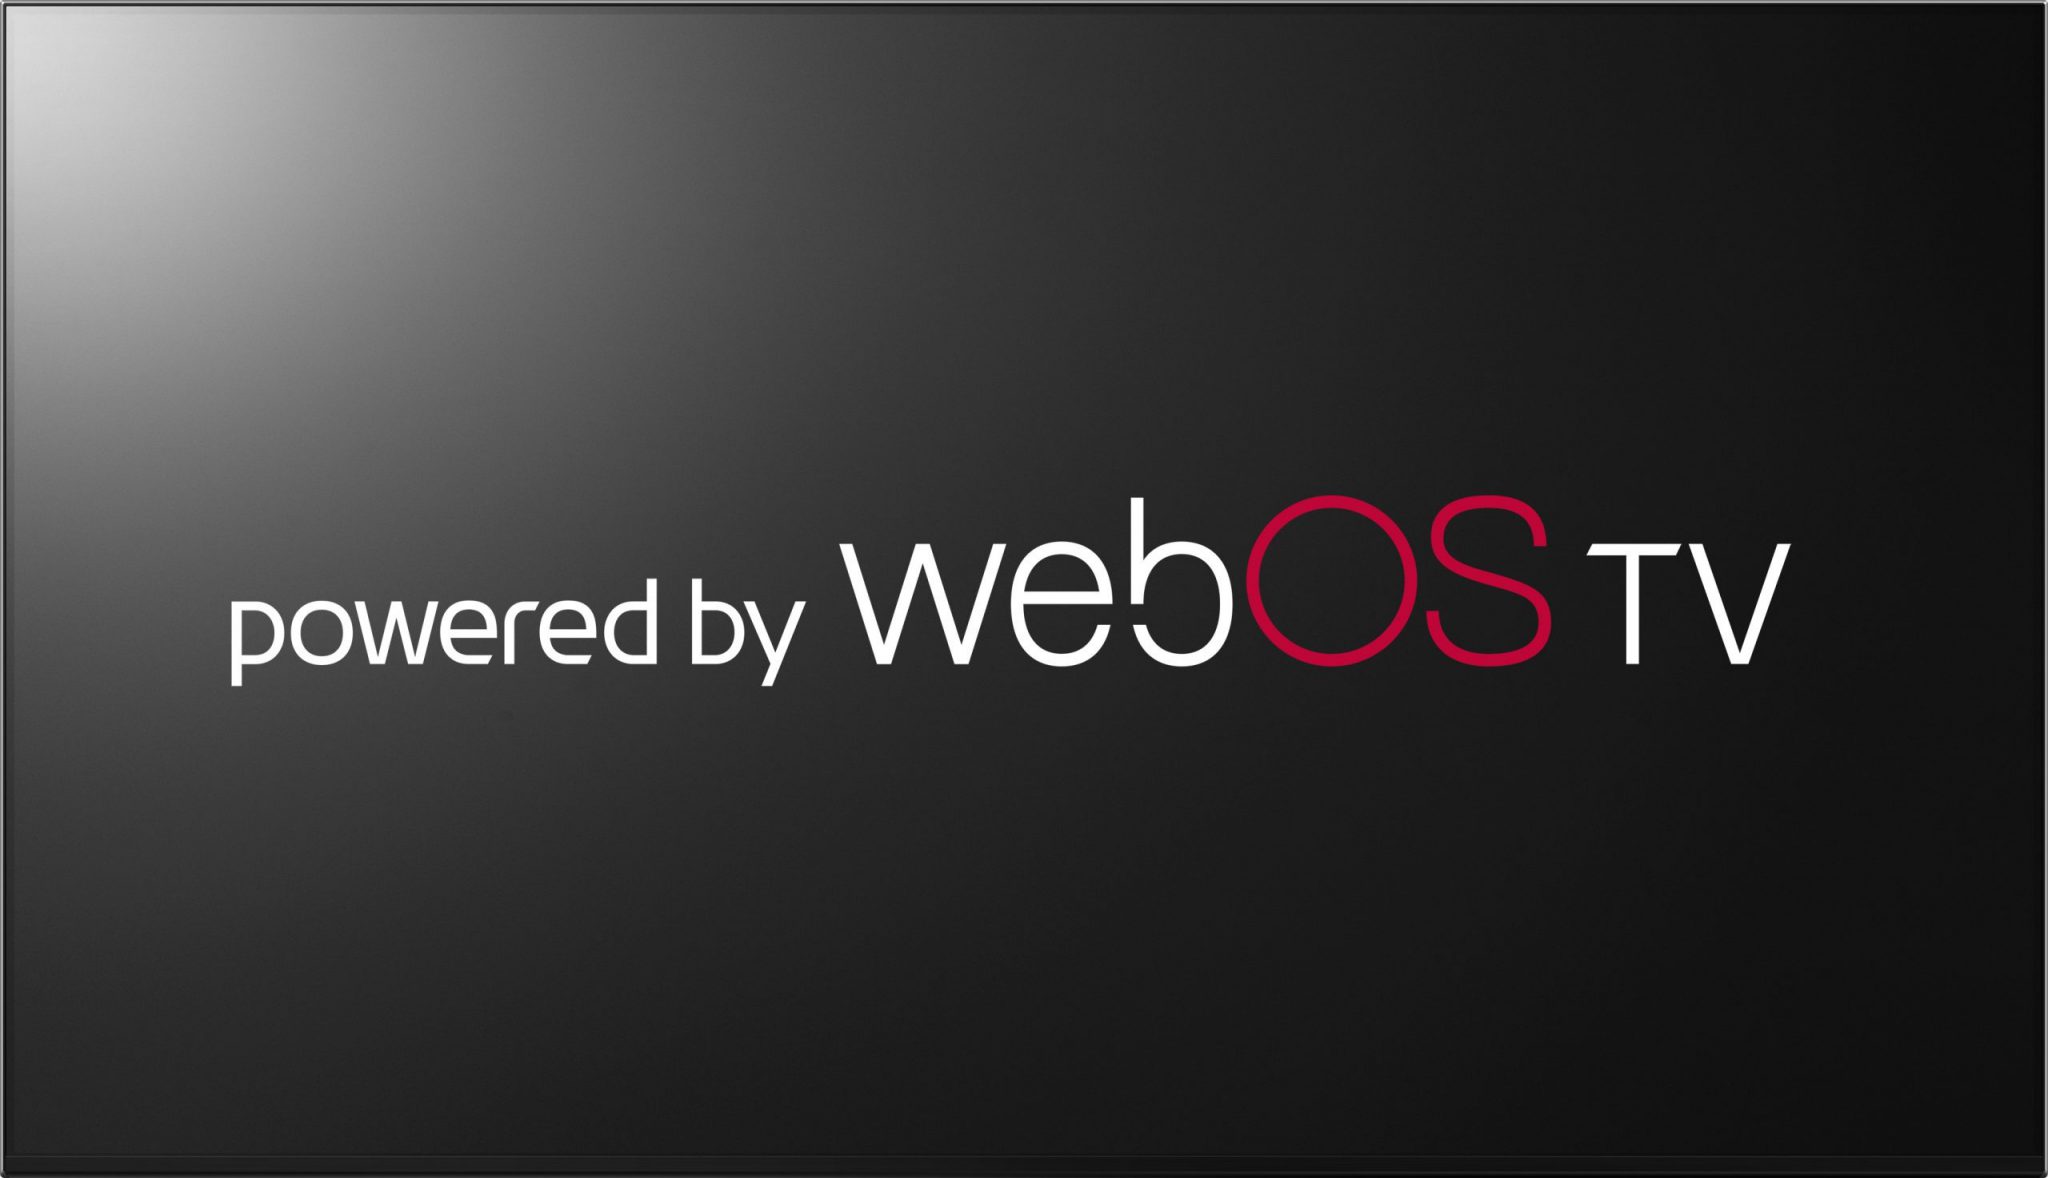 Powered by webOS TV